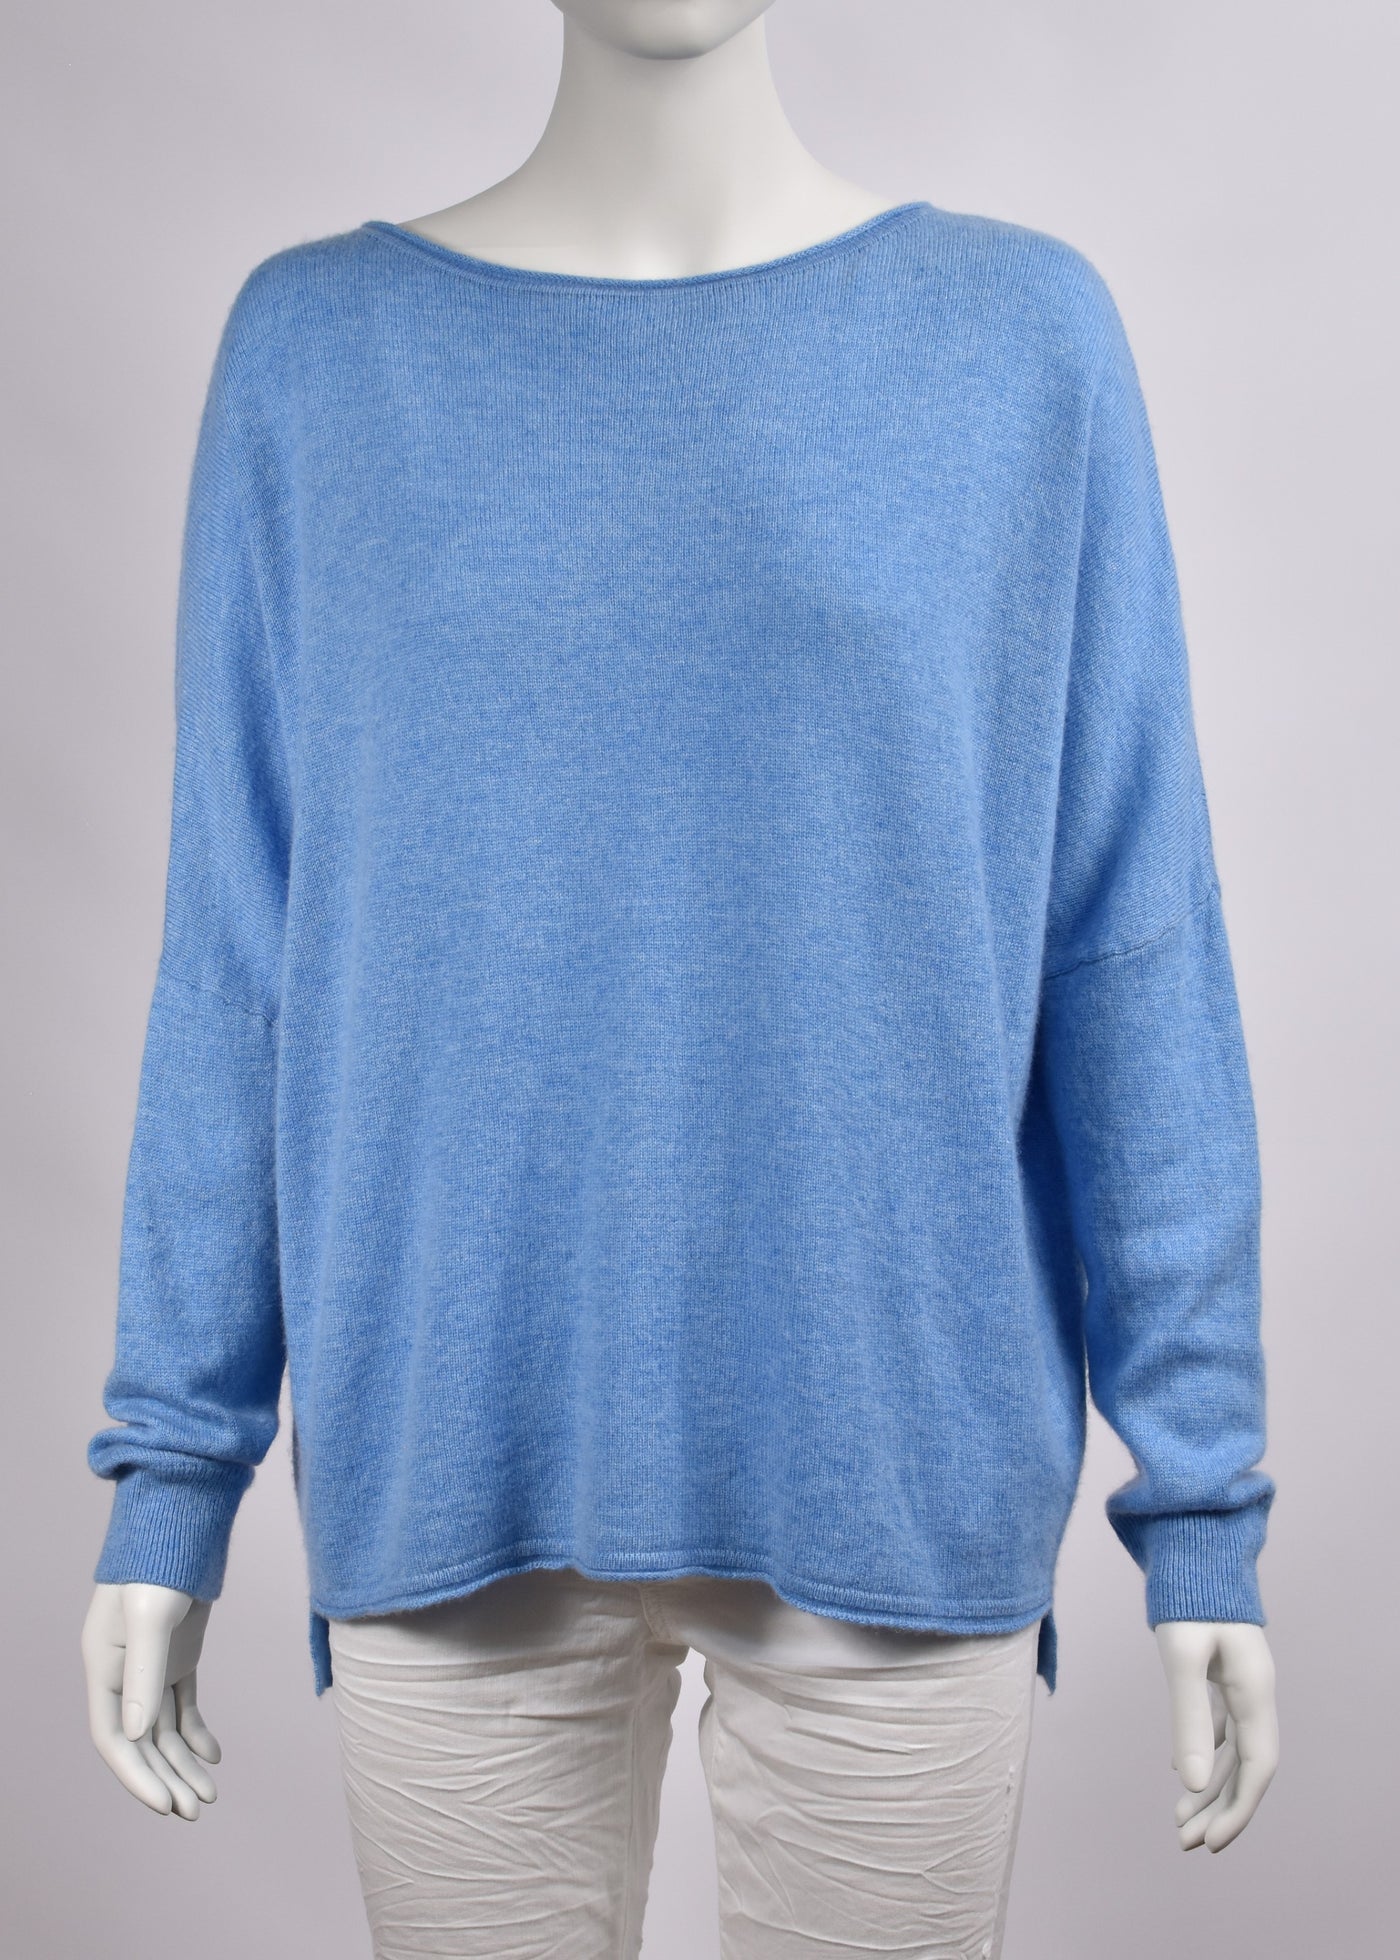 Campbell & Co</p>Boatneck Sweater</p>(Sky Blue)